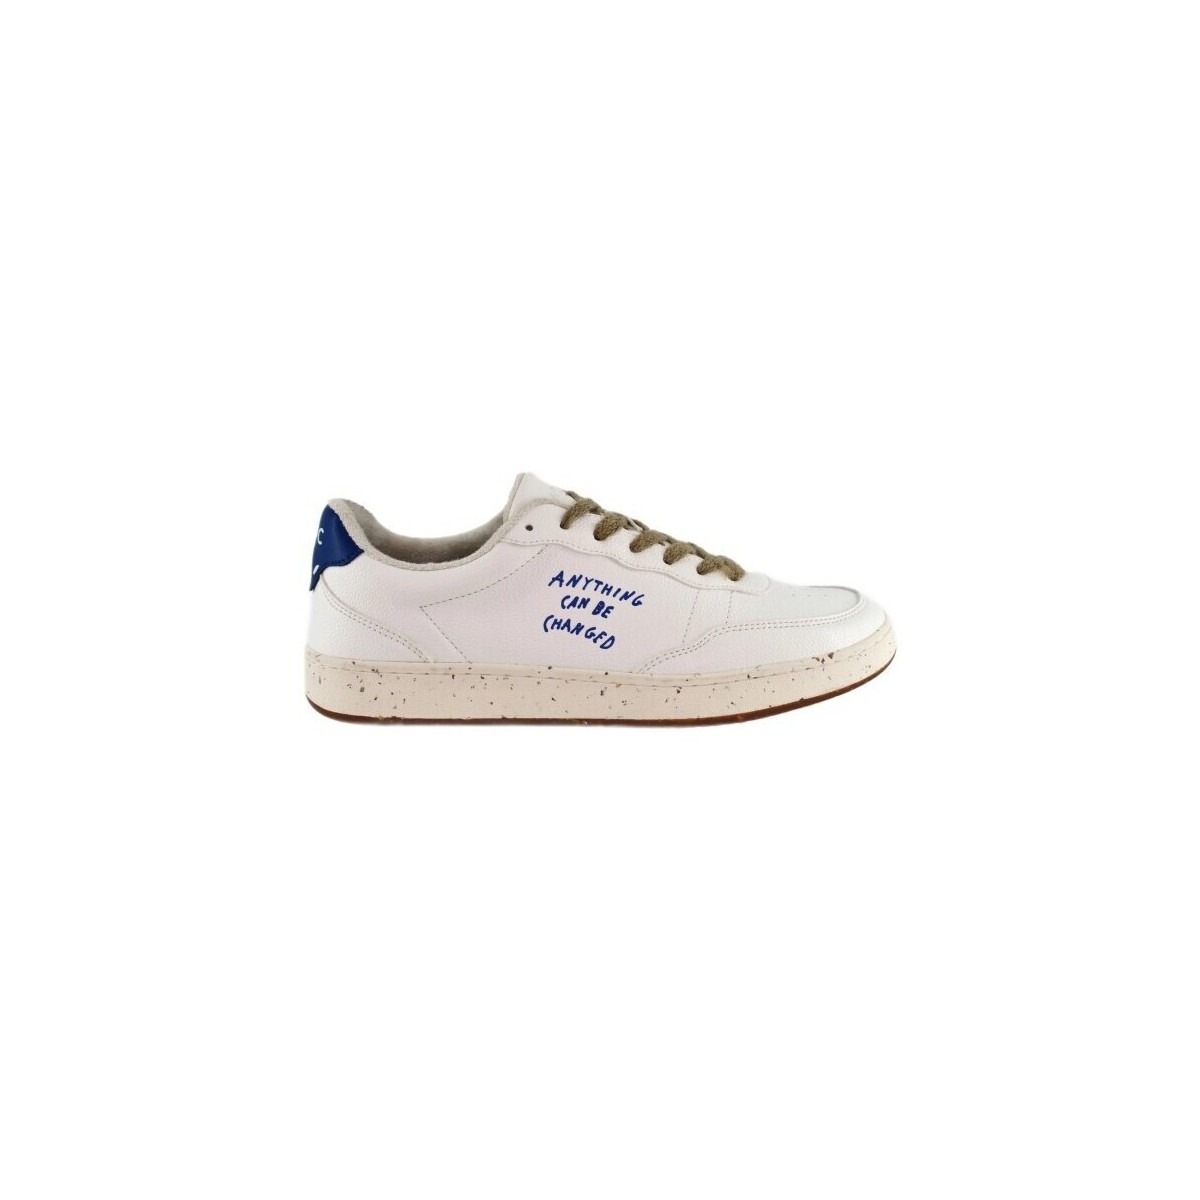 Acbc Womens Sneakers in Blue at Spartoo GOOFASH